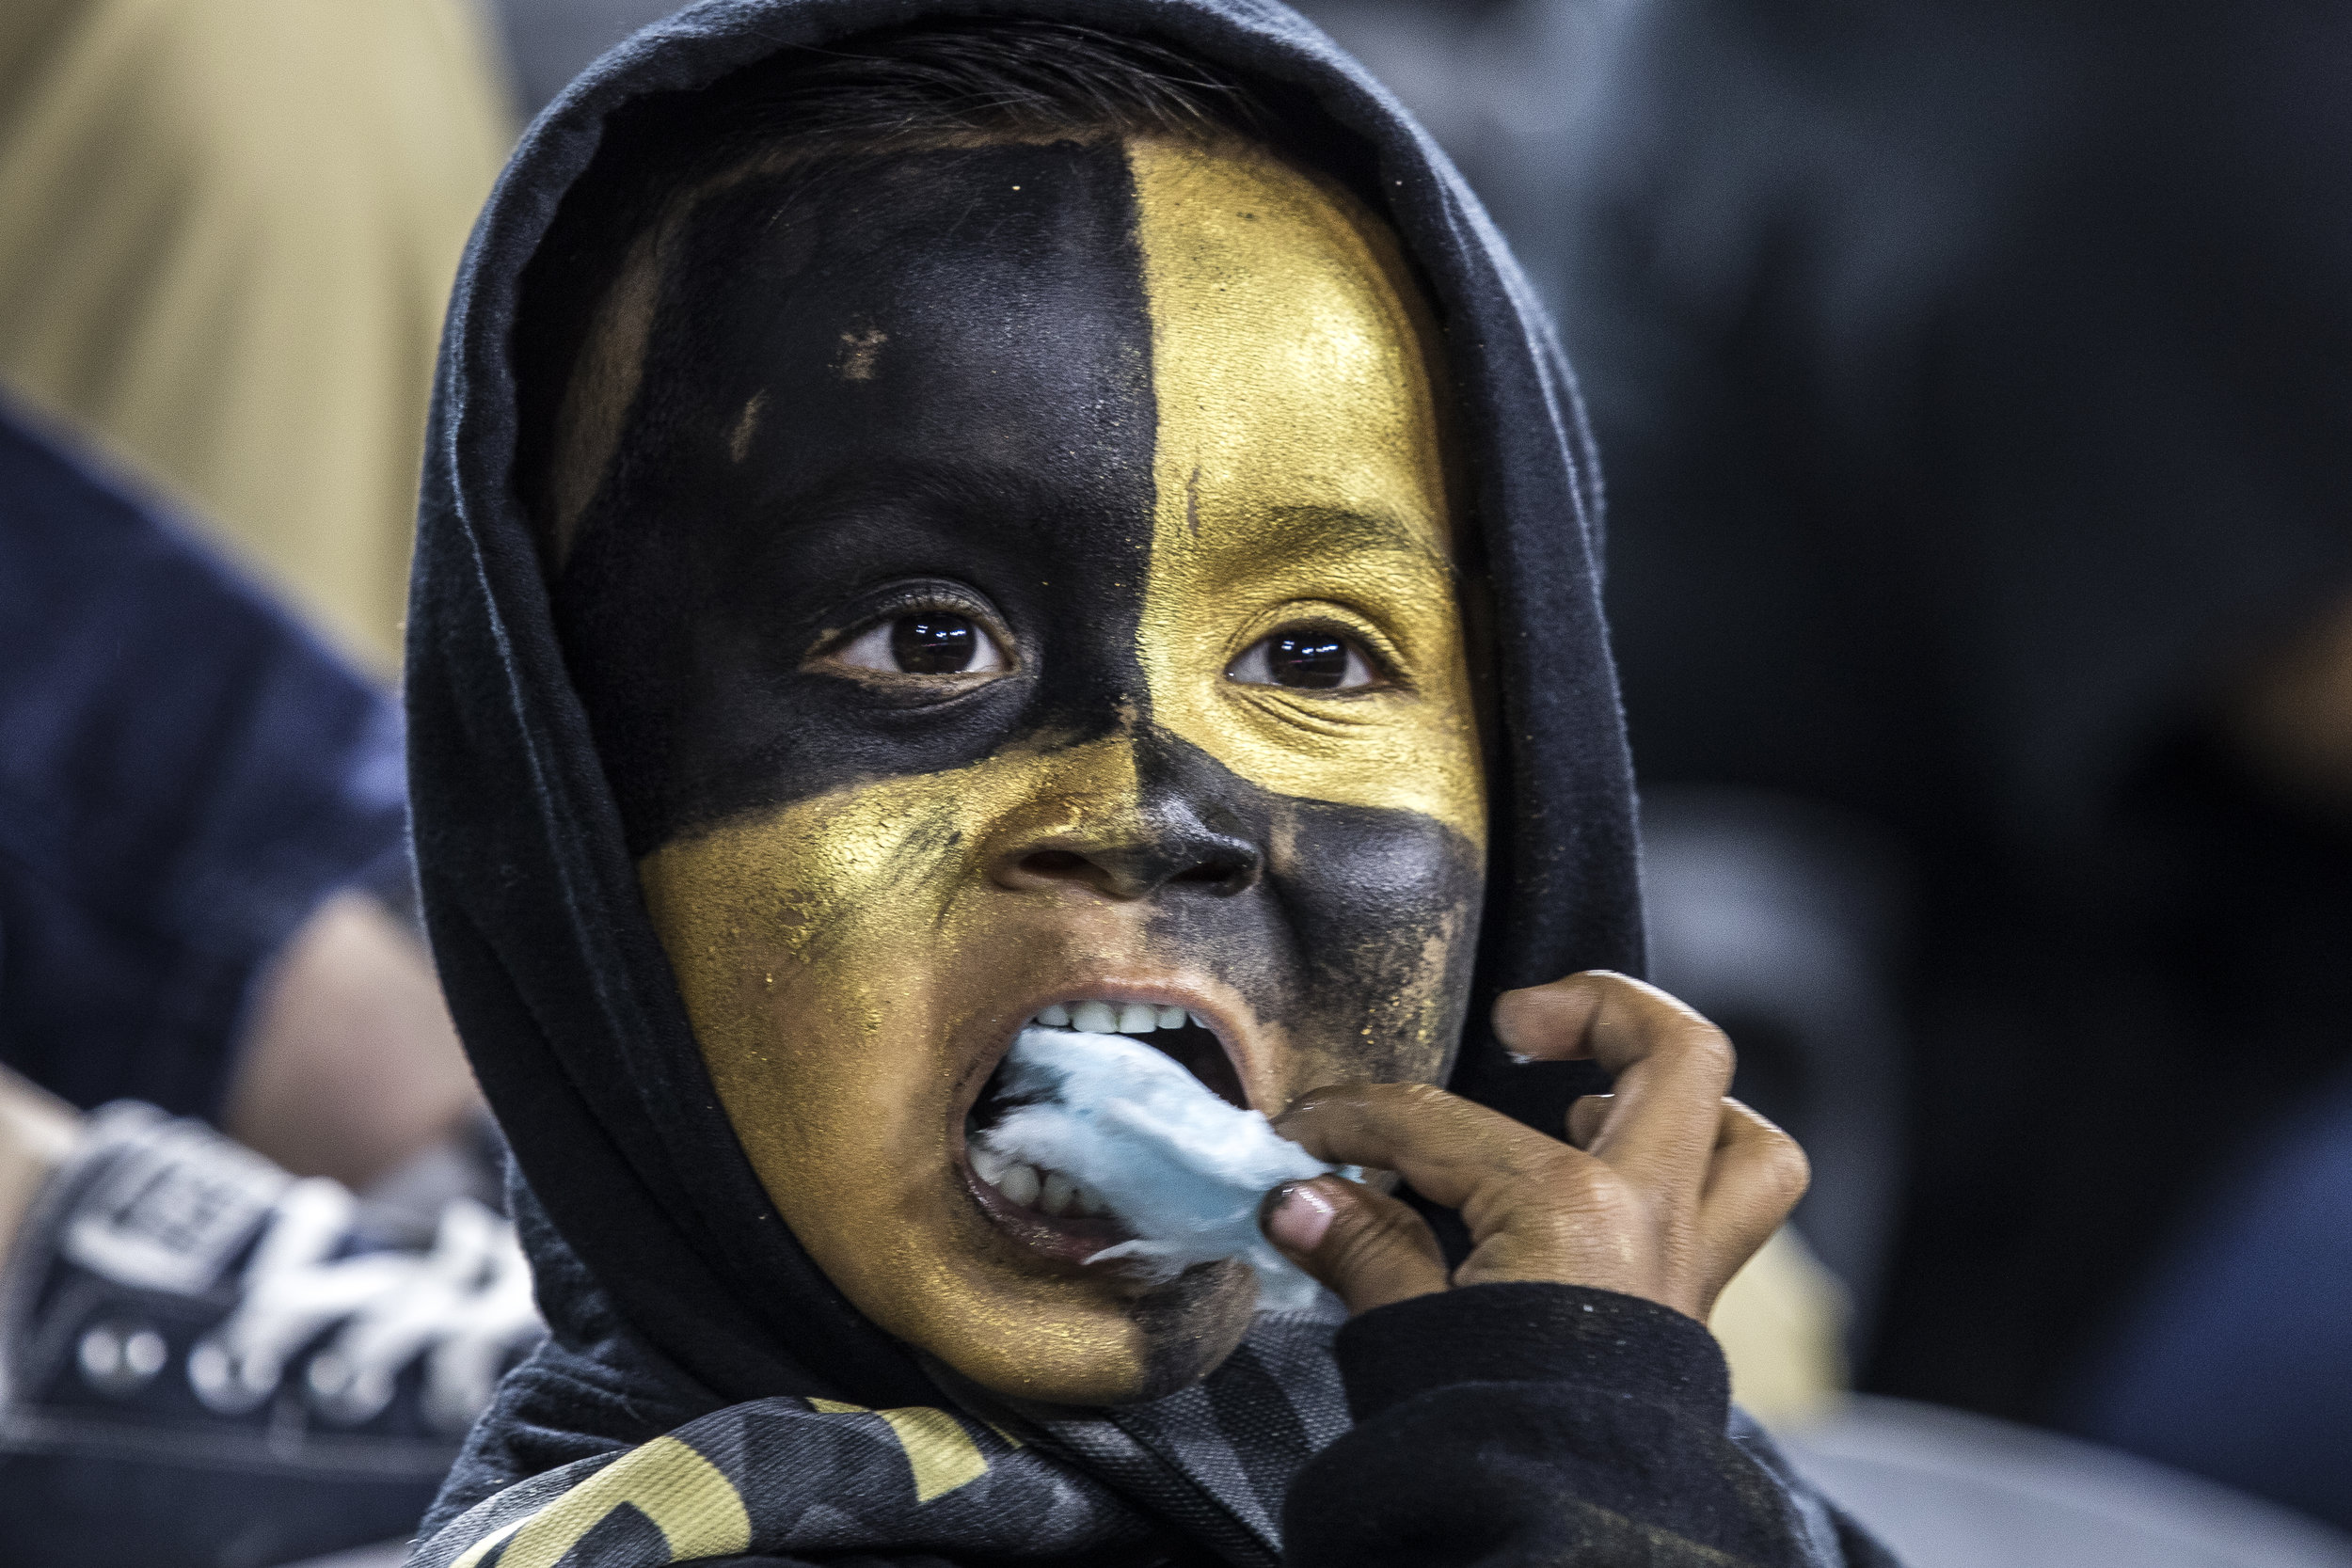  A young Los Angeles Football Club fan enjoys cotton candy during the teams match against the Minnesota United Football Club on May 9, 2018 at Banc Of California Stadium. (Zane Meyer-Thornton/Corsair Photo) 